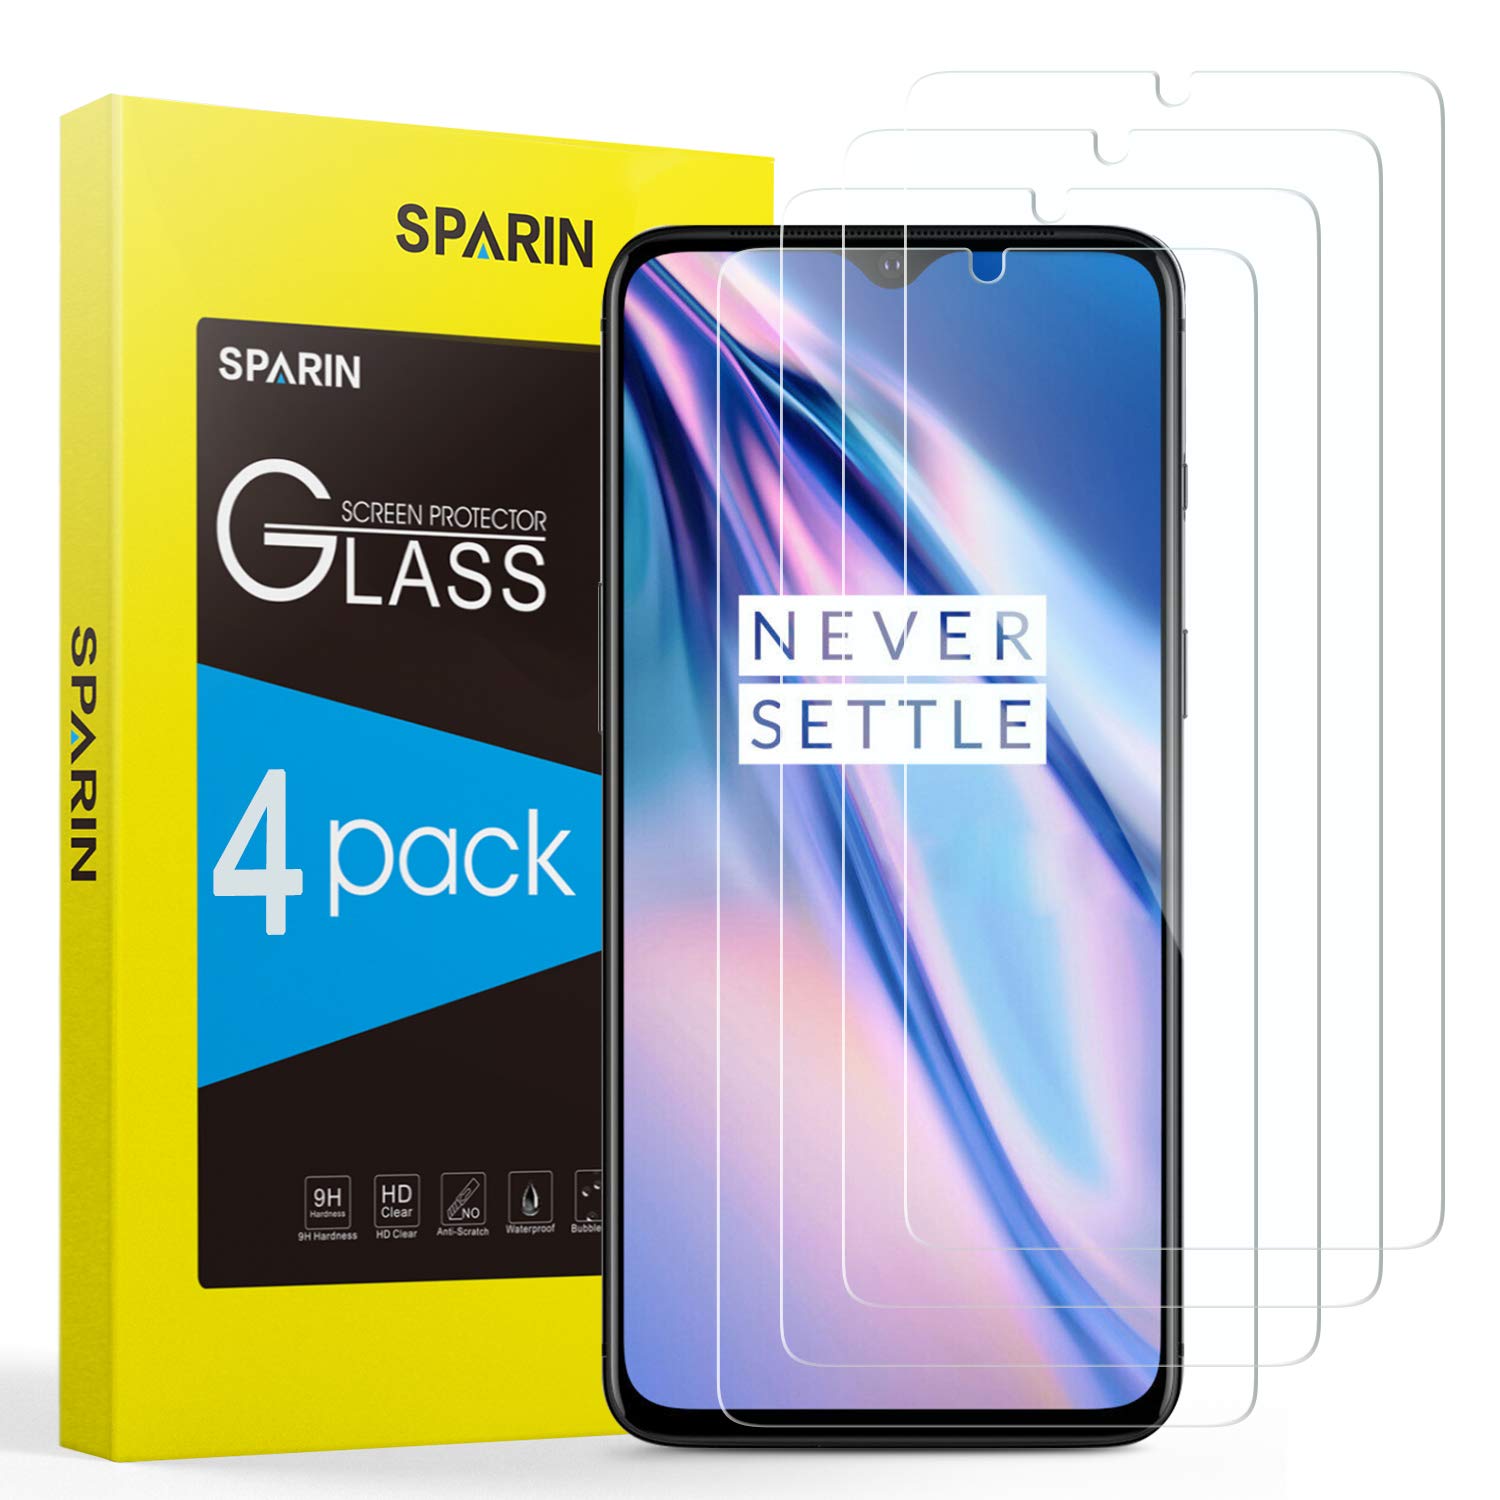 Sparin Tempered Glass Screen Protectors